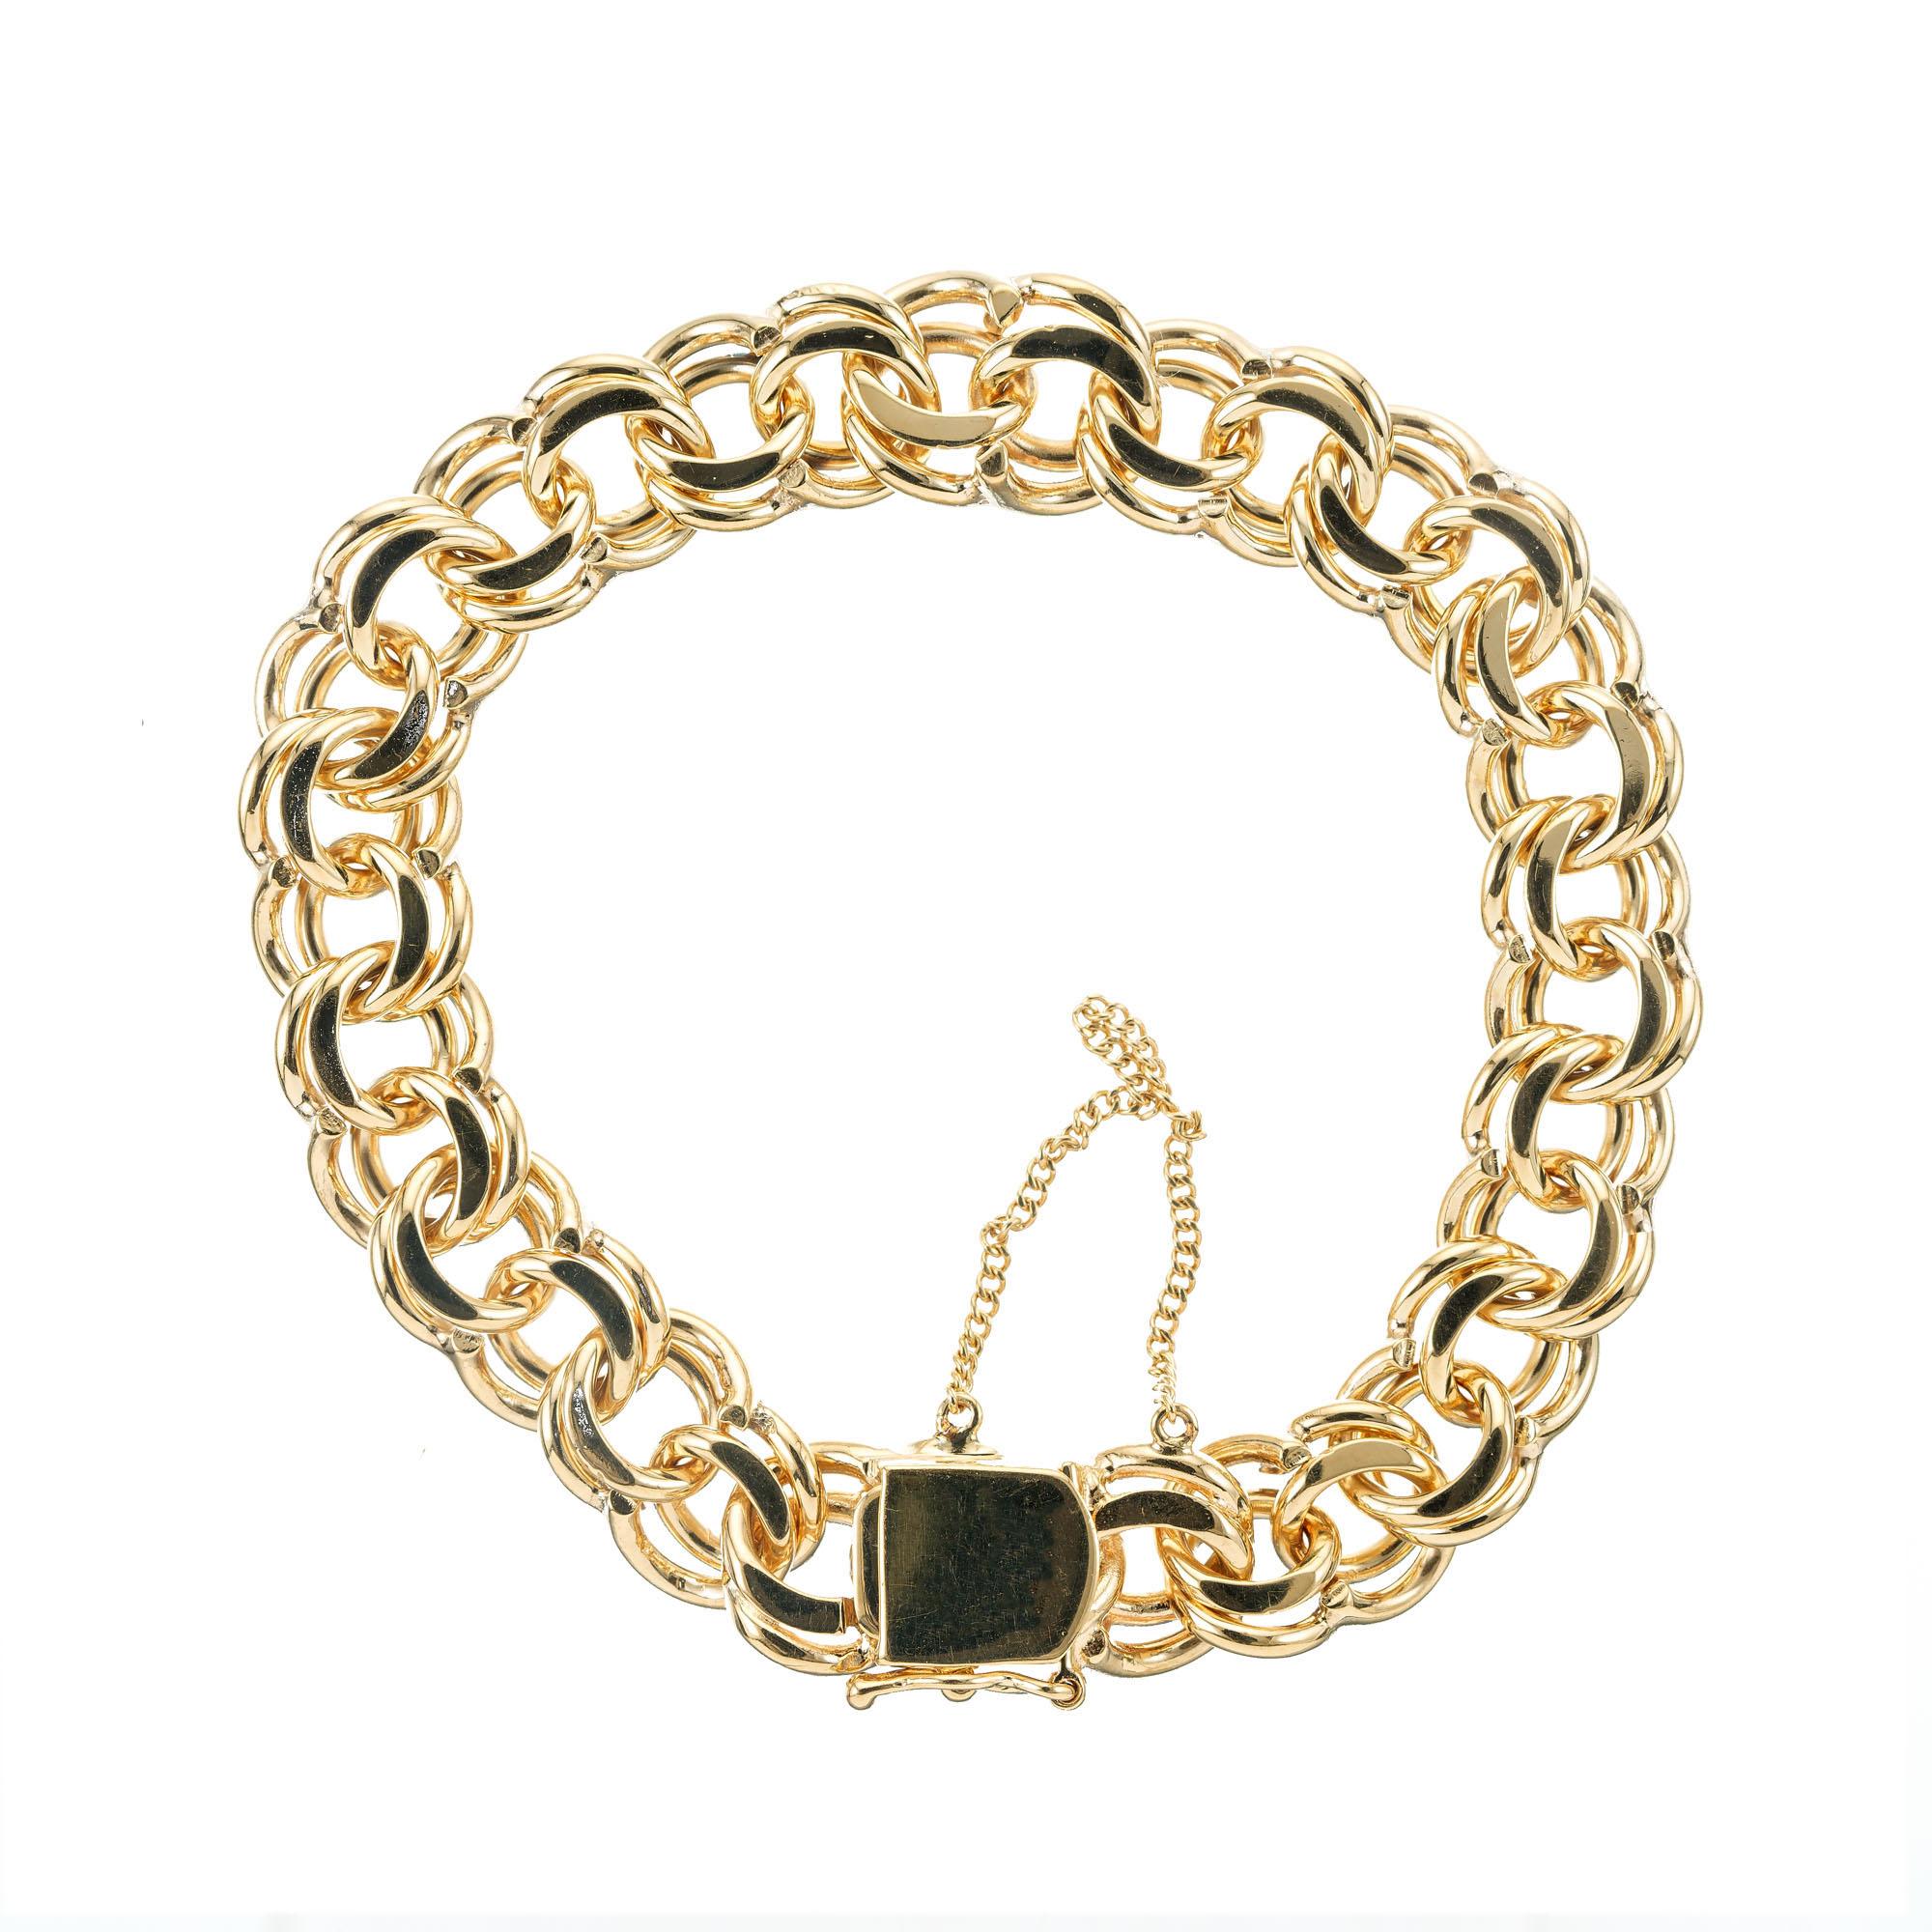 1950'd, 8 inch long heavy double spiral link charm bracelet in 14k yellow gold. 

14k yellow gold 
Stamped: 14k
49.5 grams
Chain: 8 Inches
Width: 12.26mm
Thickness/depth: 5.5mm
